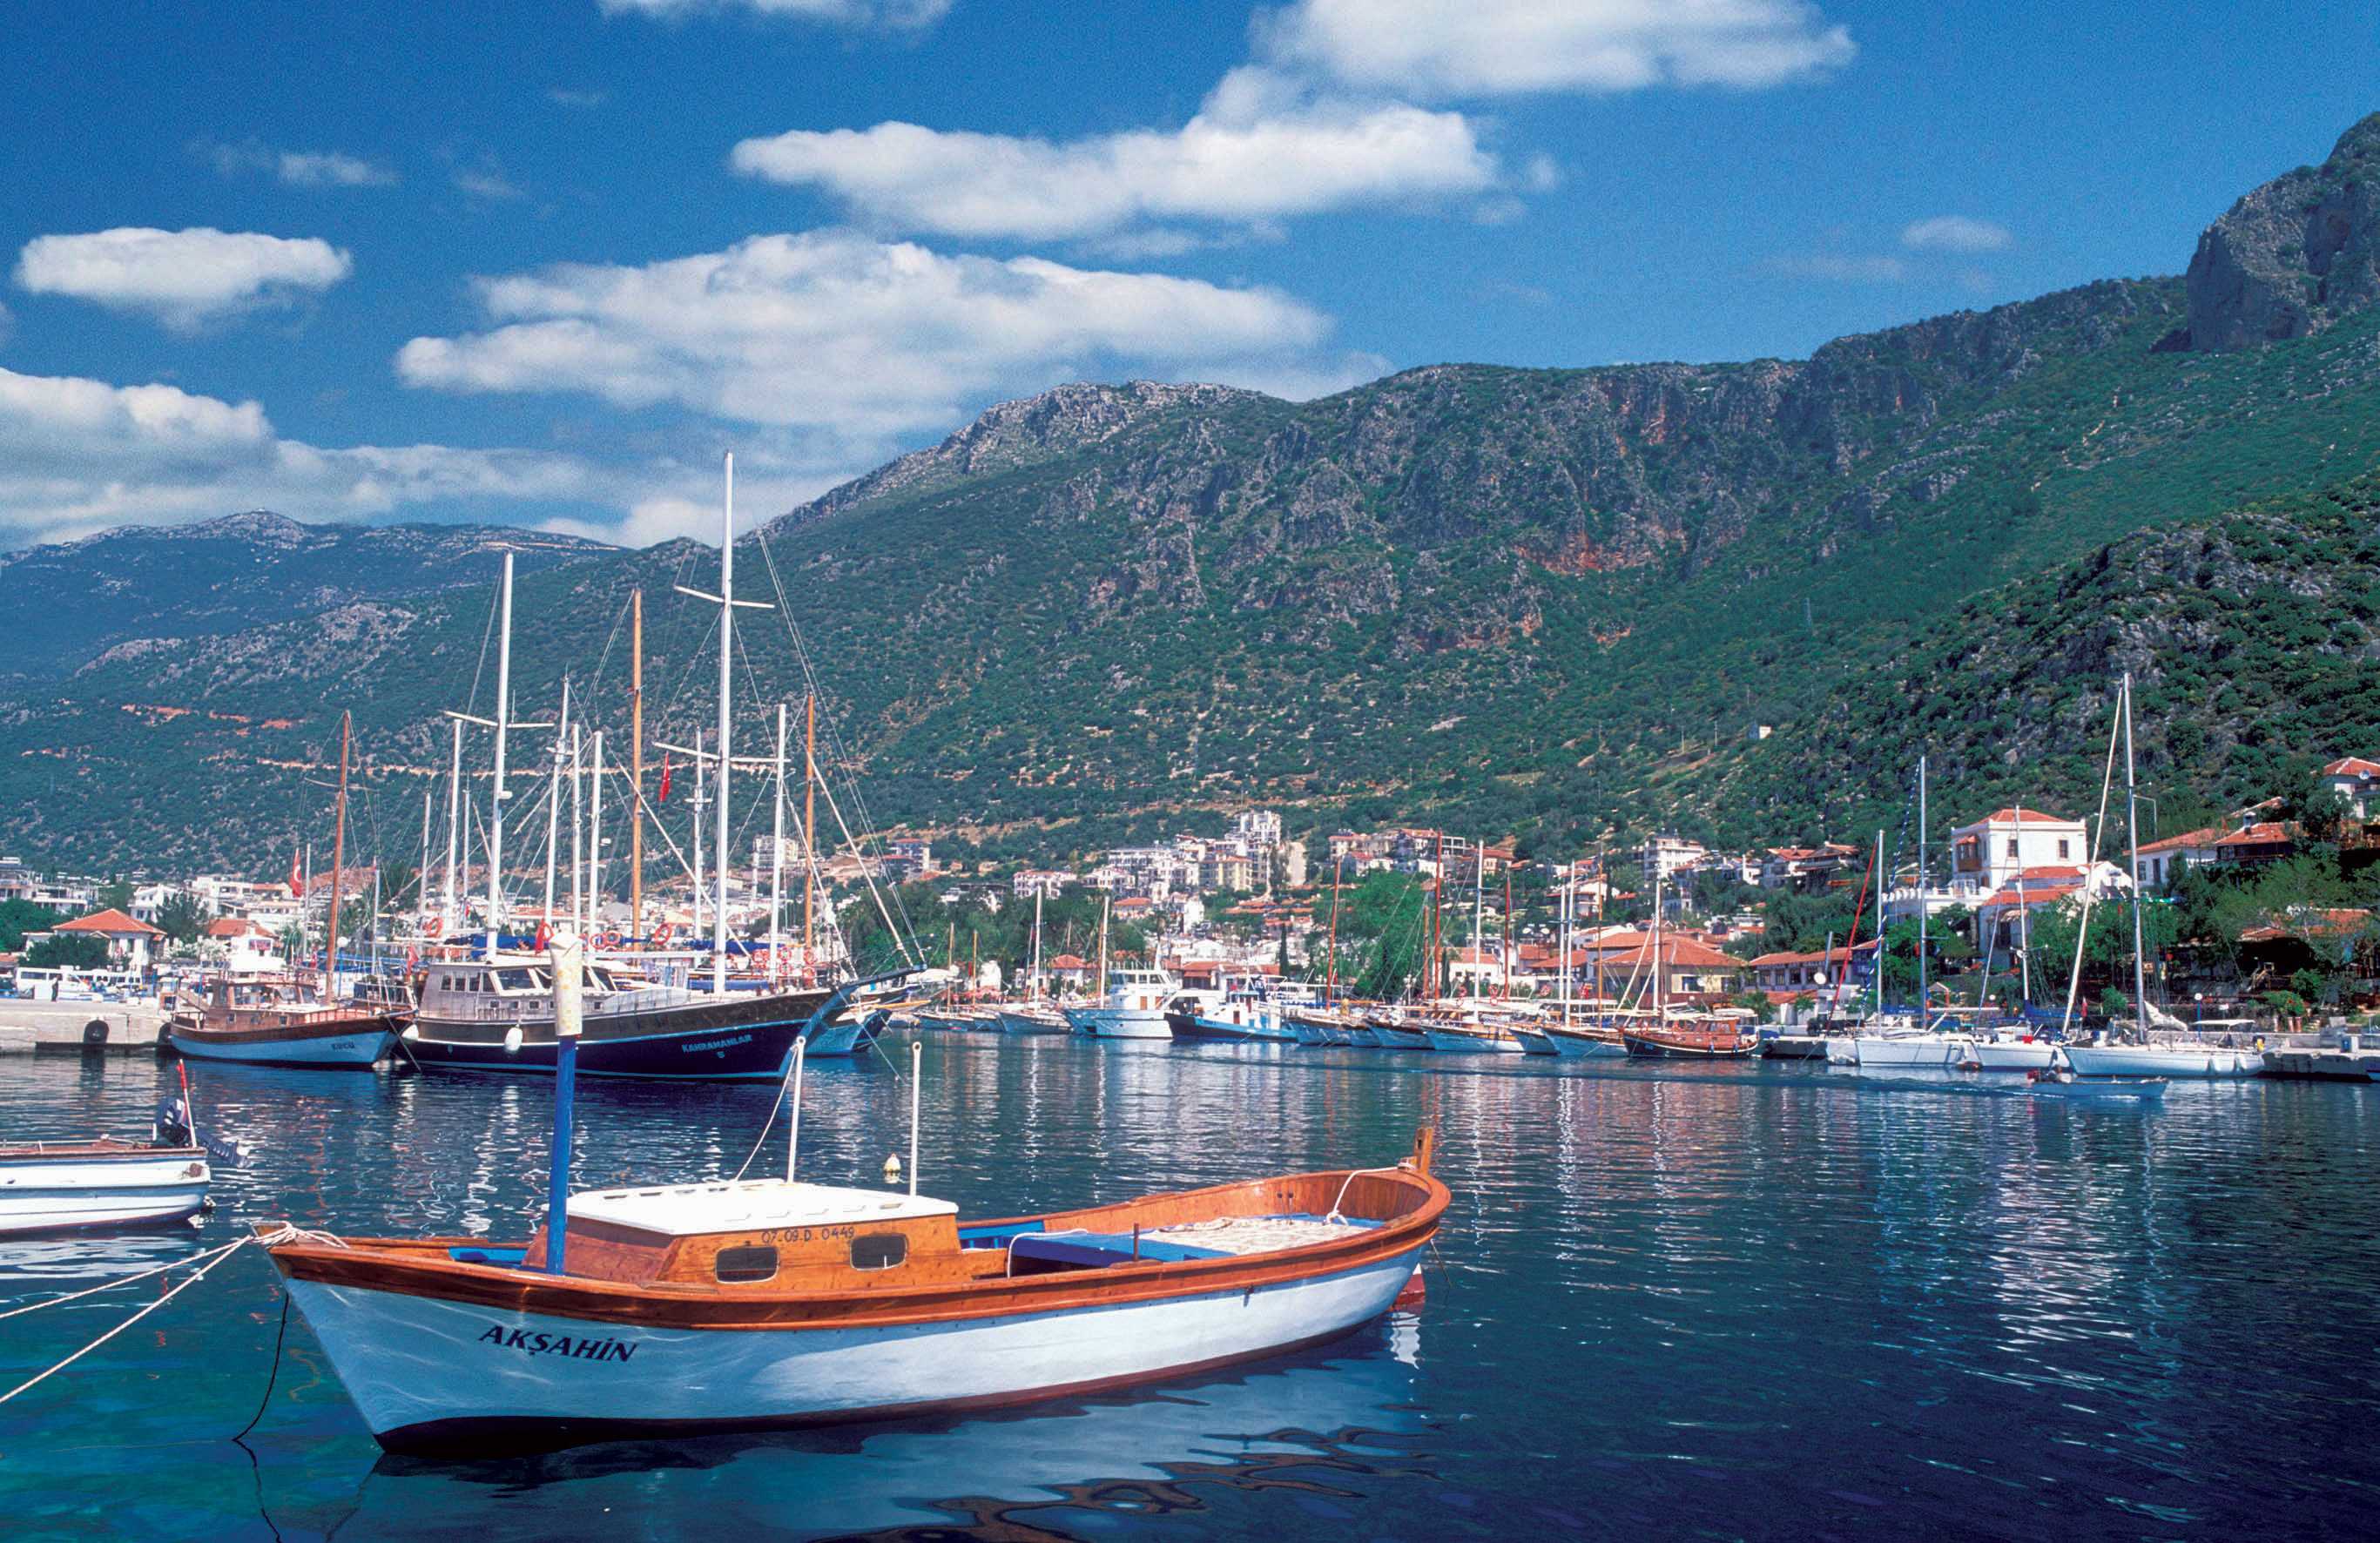 Turkish magic:Experience the beauty of Turkey in this 6 night itinerary